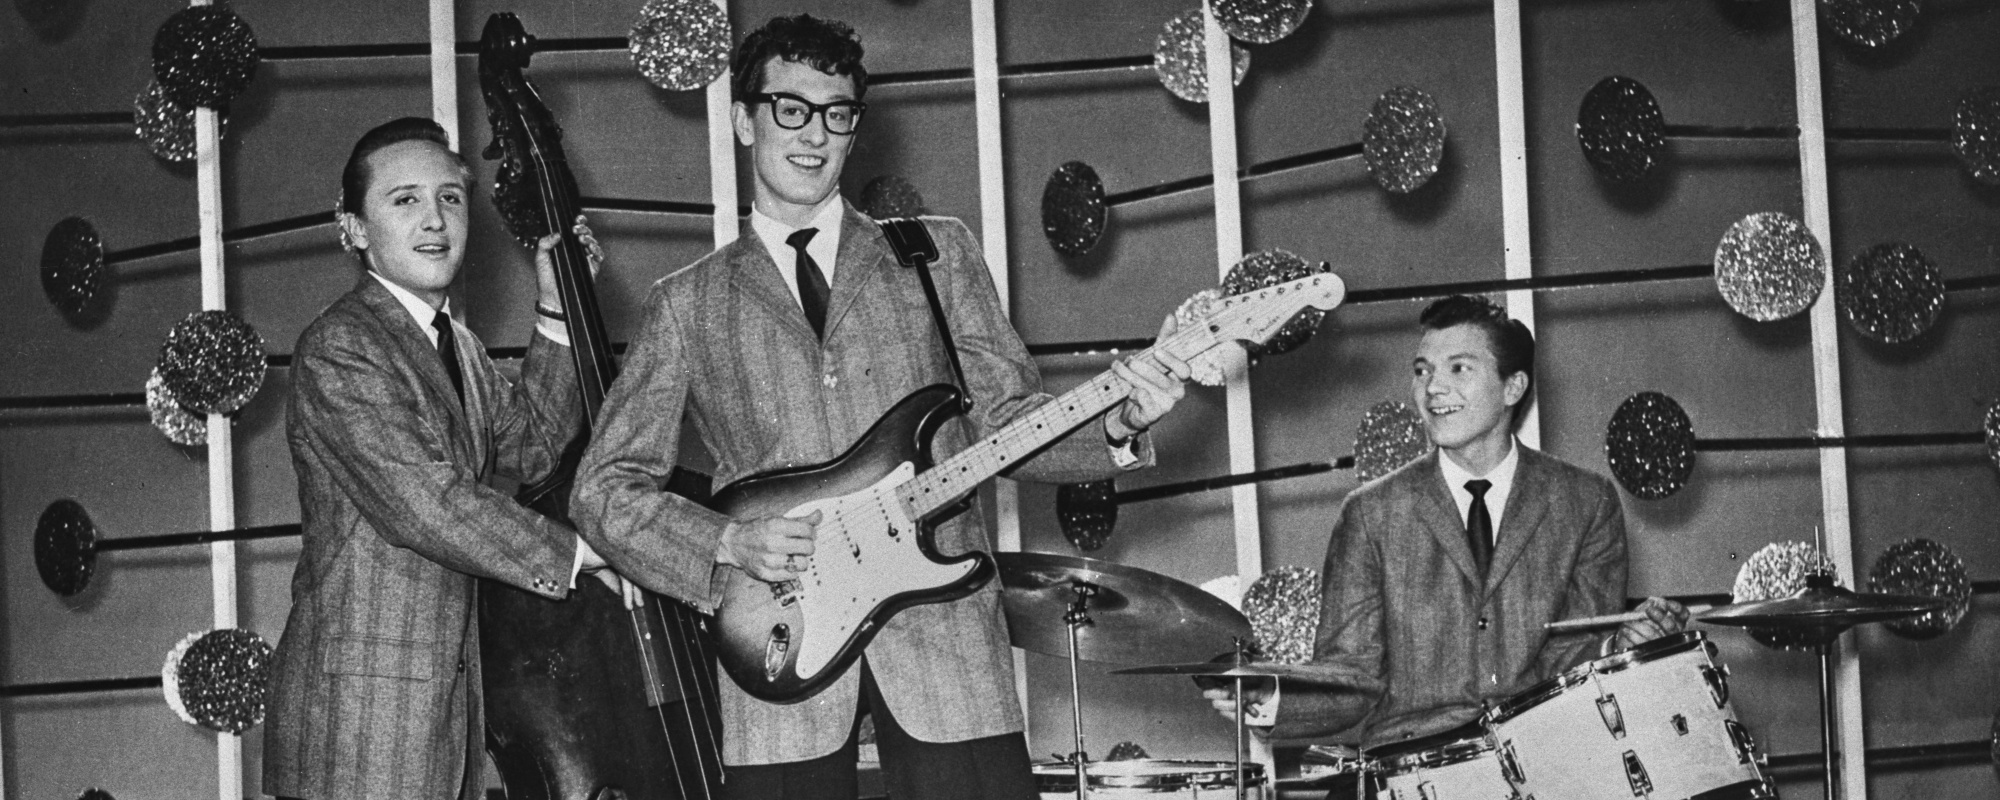 From the Silver Screen to Liverpool: The Story Behind “That’ll Be the Day” by Buddy Holly and The Crickets